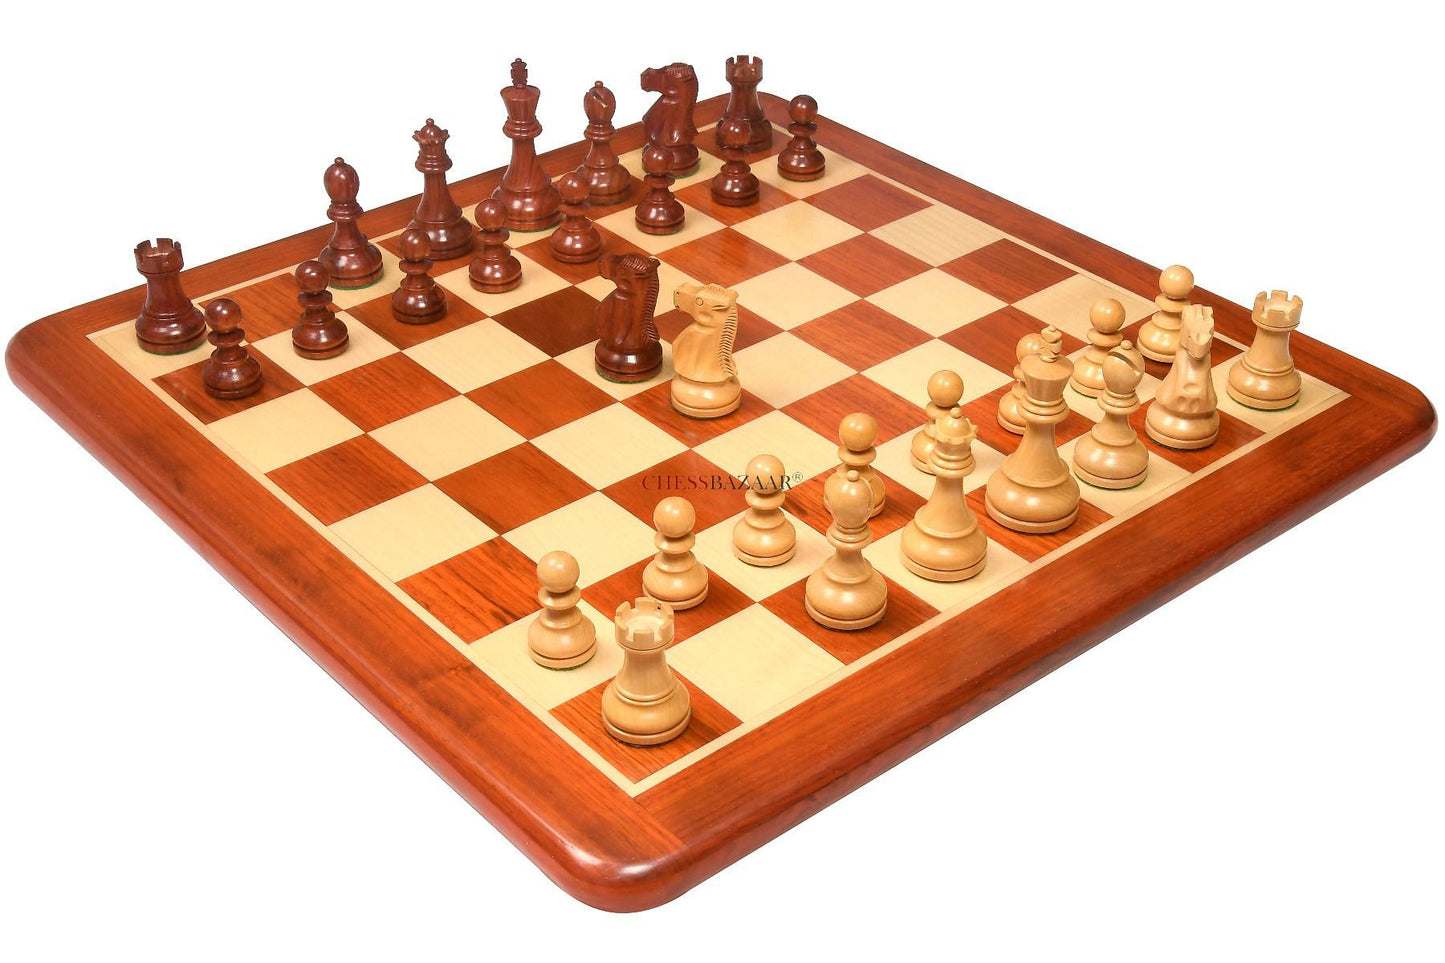 Reproduced 1972 Reykjavik Championship Series Chess Pieces in Bud Rosewood & Box Wood - 3.7" King